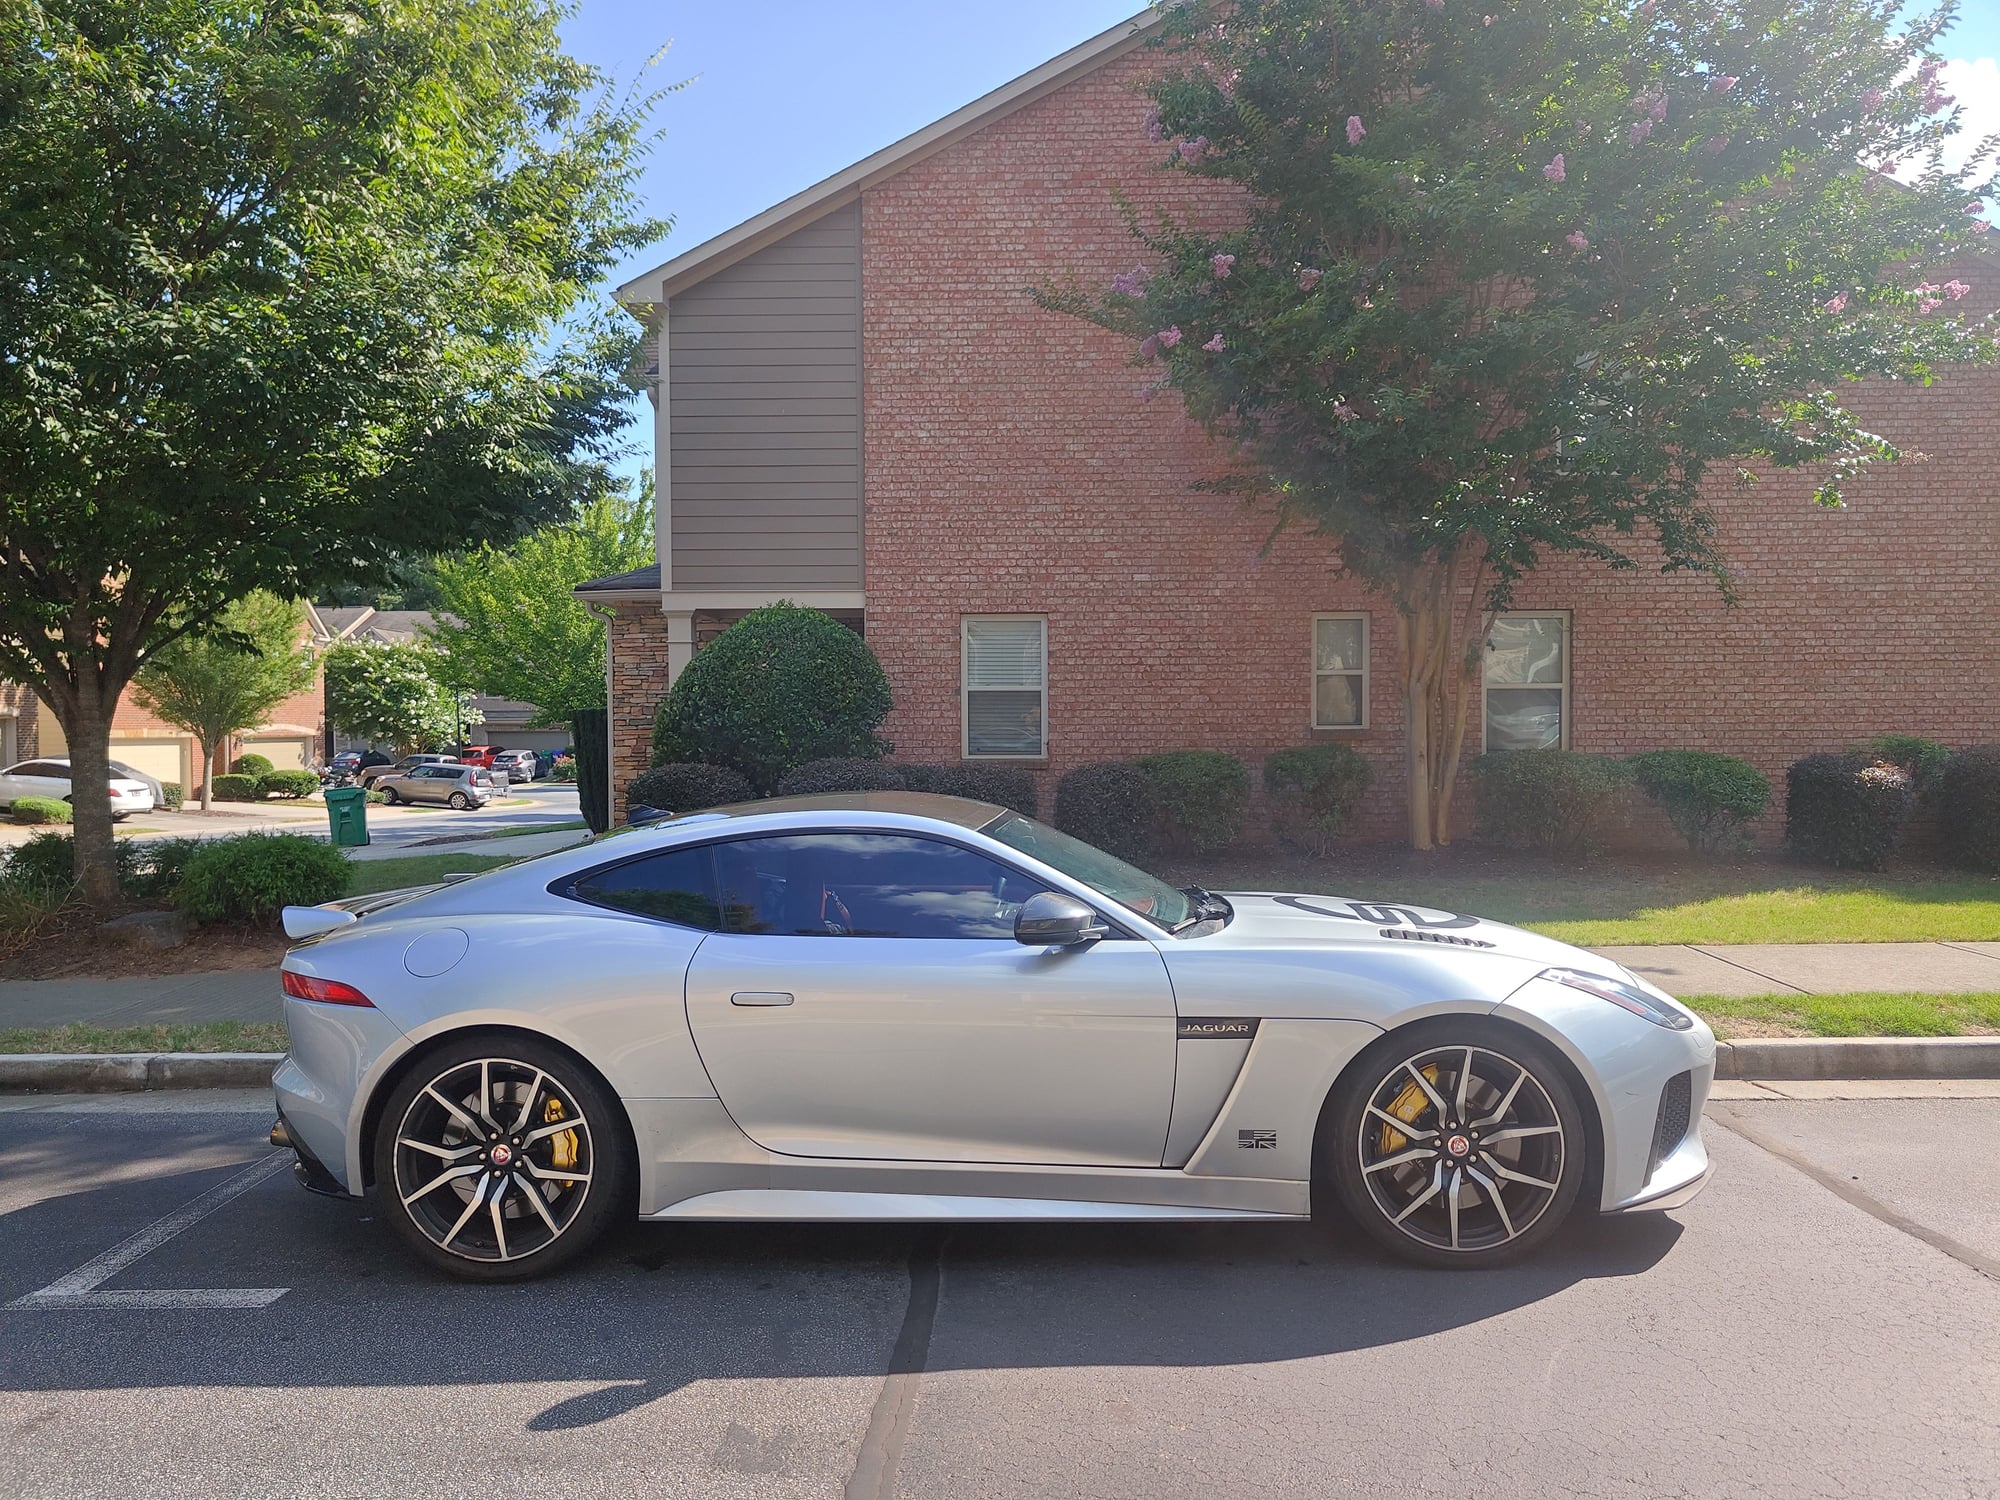 2017 Jaguar F-Type - FS: 2017 F-type SVR Rhodium Silver/ Red - Used - VIN SAJWJ6J82HMK39053 - 52,000 Miles - 8 cyl - AWD - Automatic - Coupe - Silver - Chamblee, GA 30341, United States